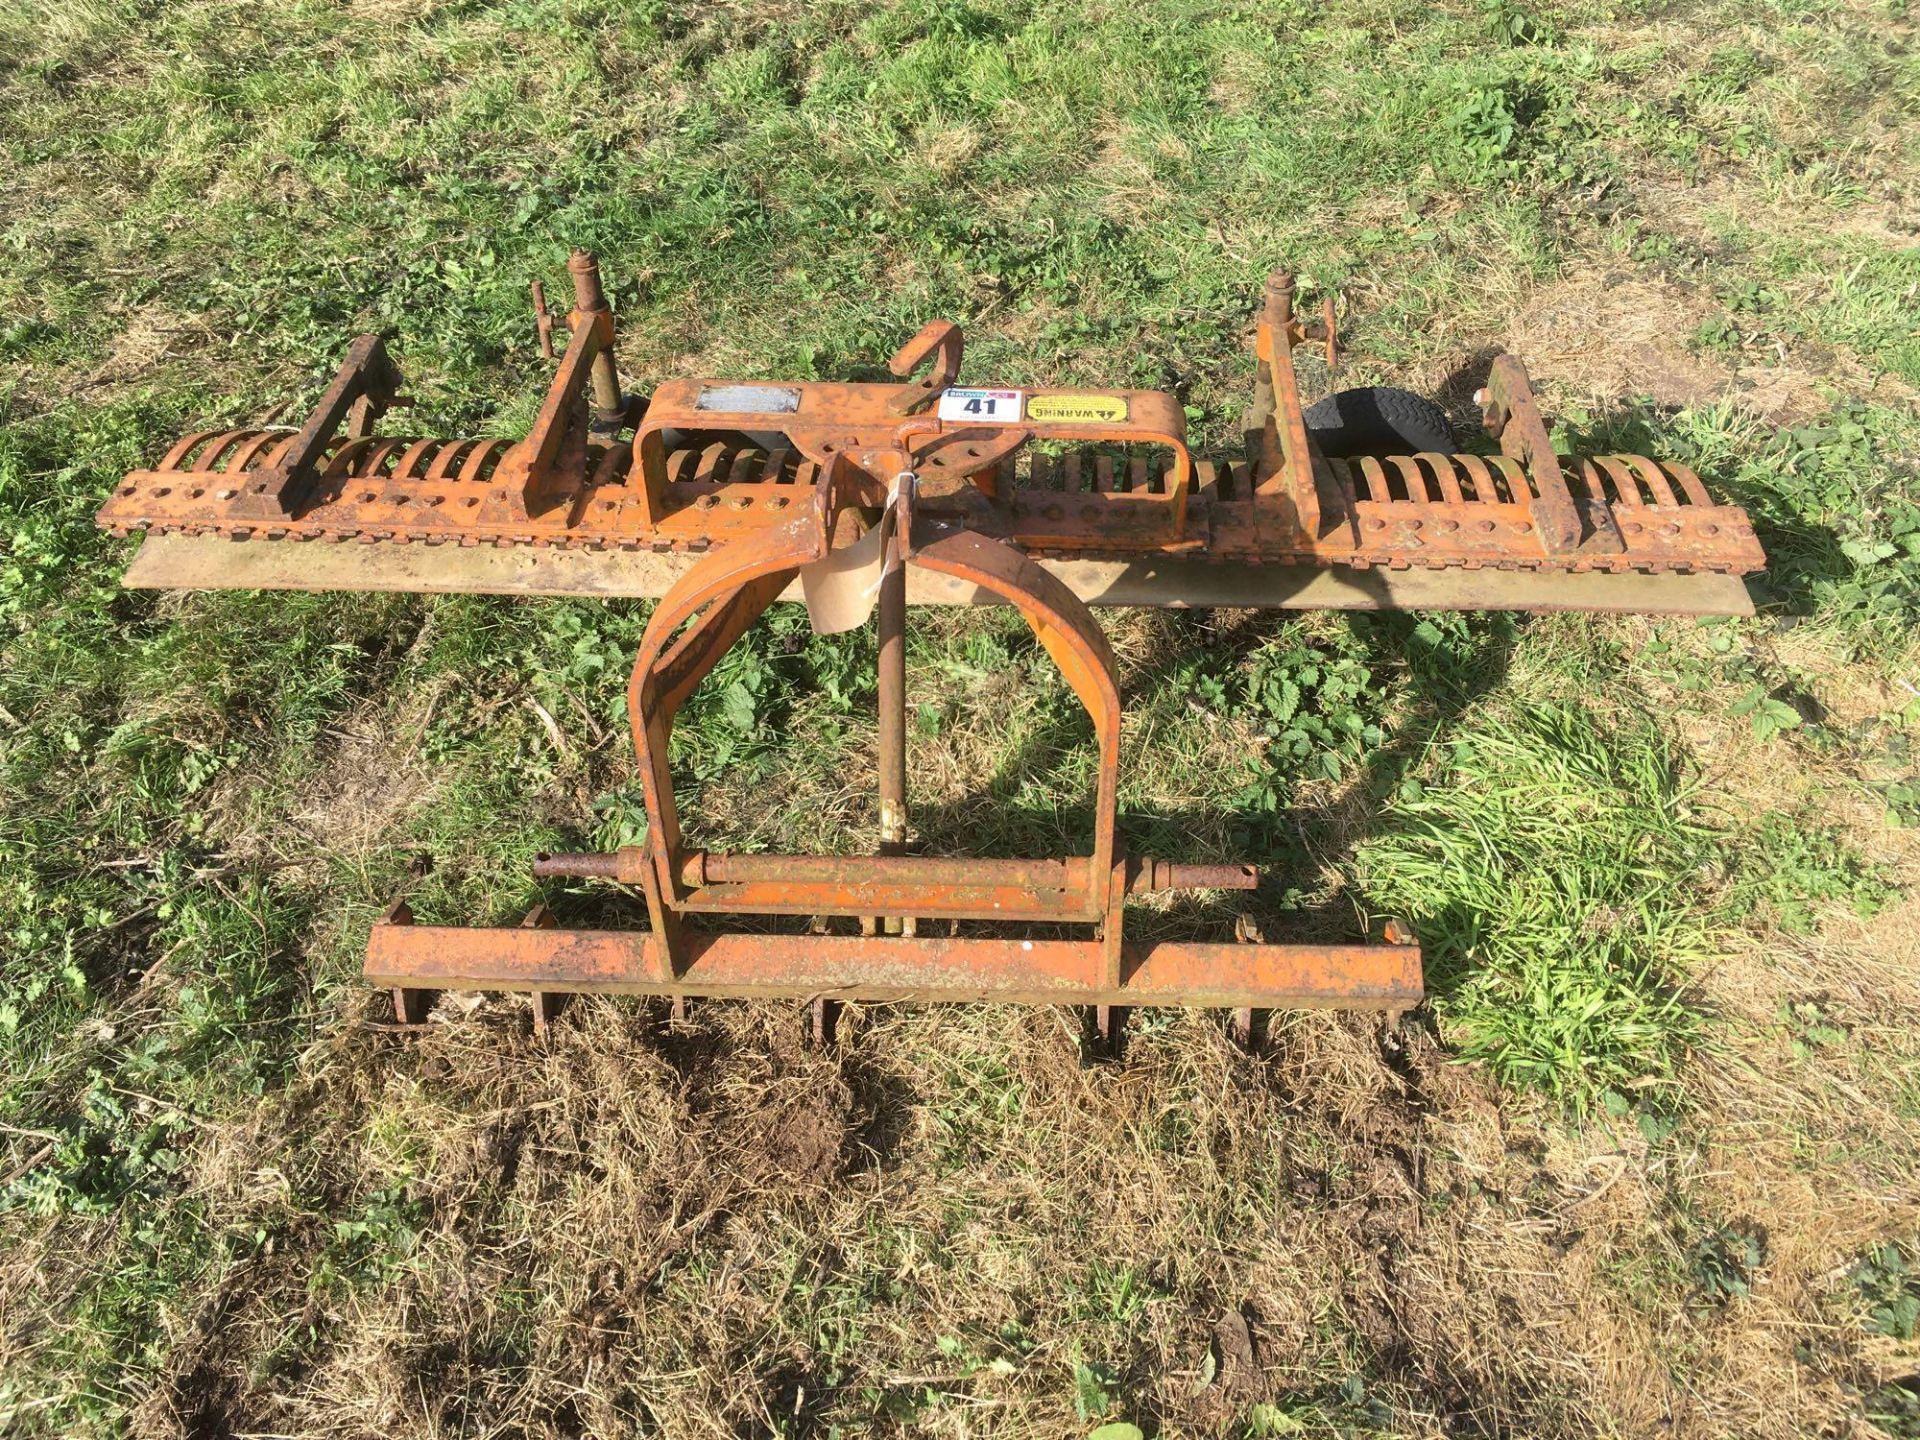 York rake for compact tractor 6' width, c/w optional grader bar & scarifying teeth (1 missing). - Image 3 of 5